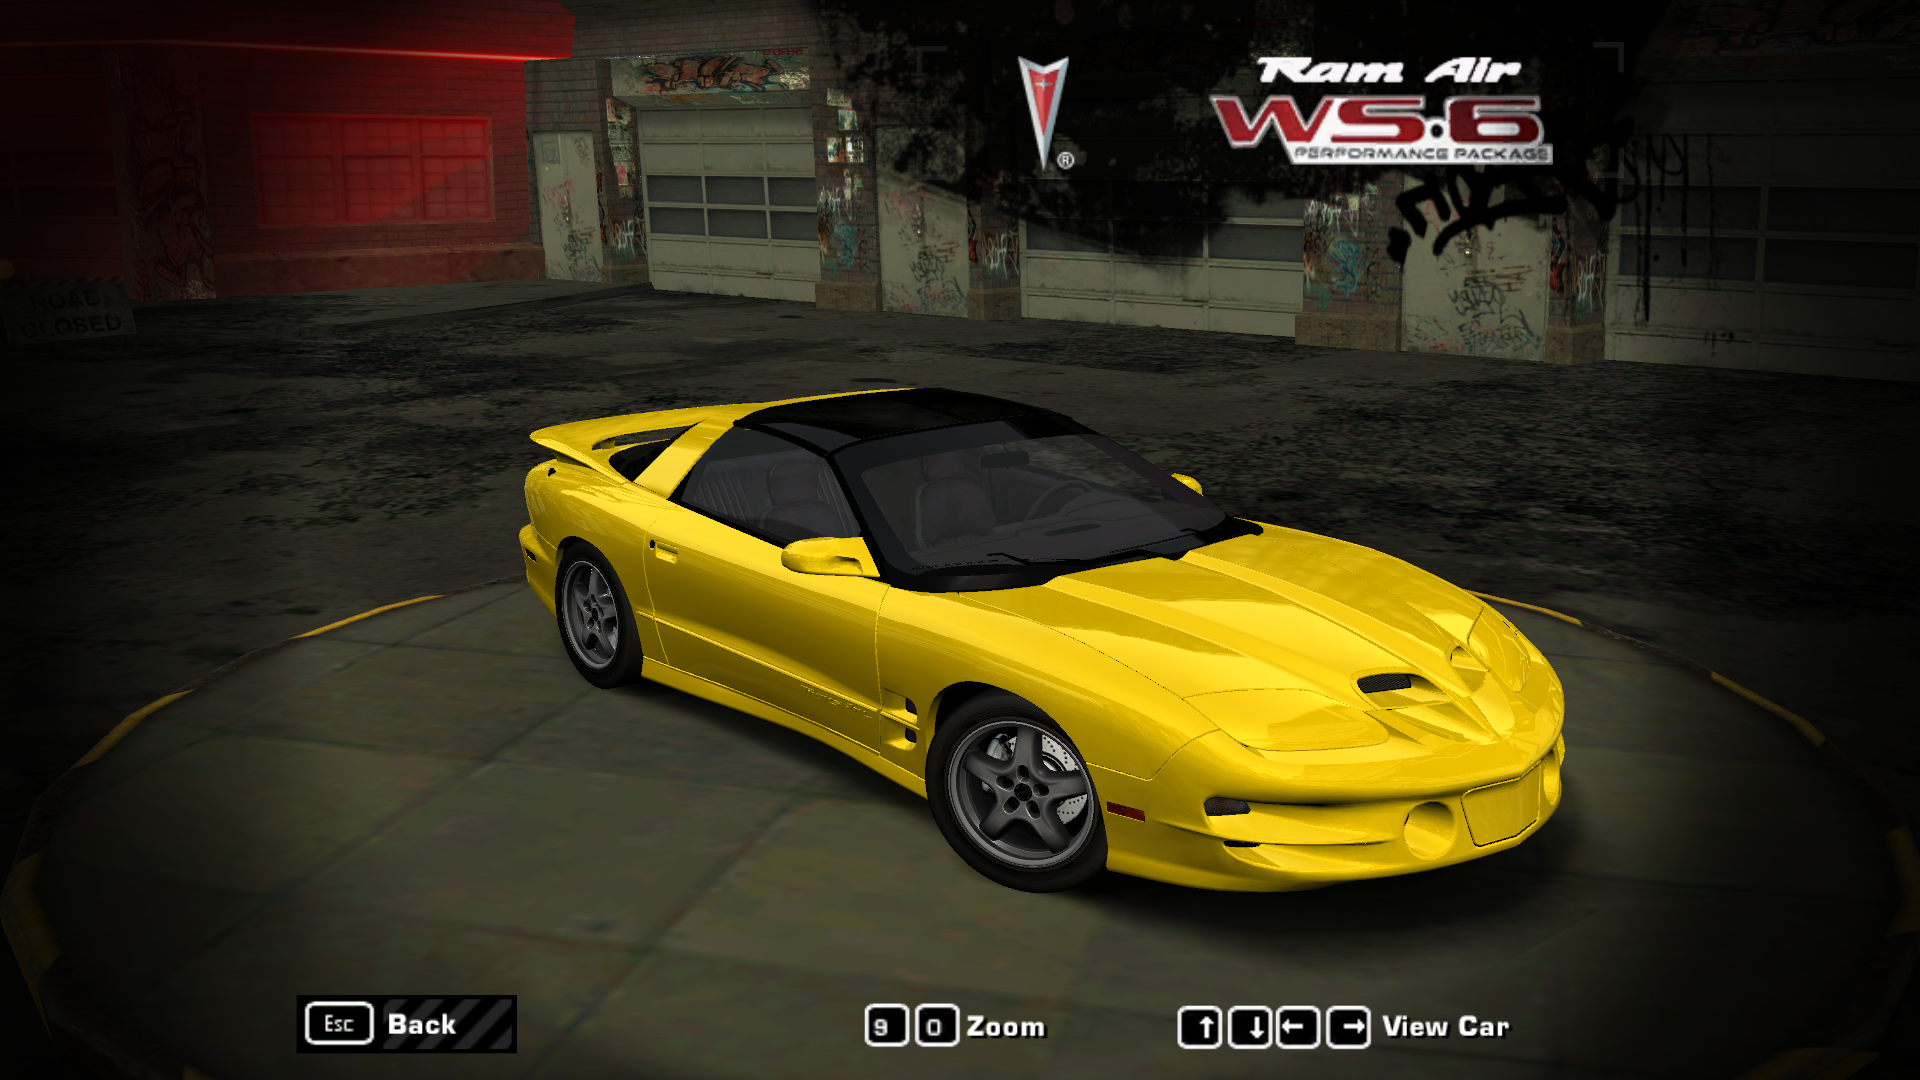 Need For Speed Most Wanted 2002 Pontiac Firebird Trans Am WS6